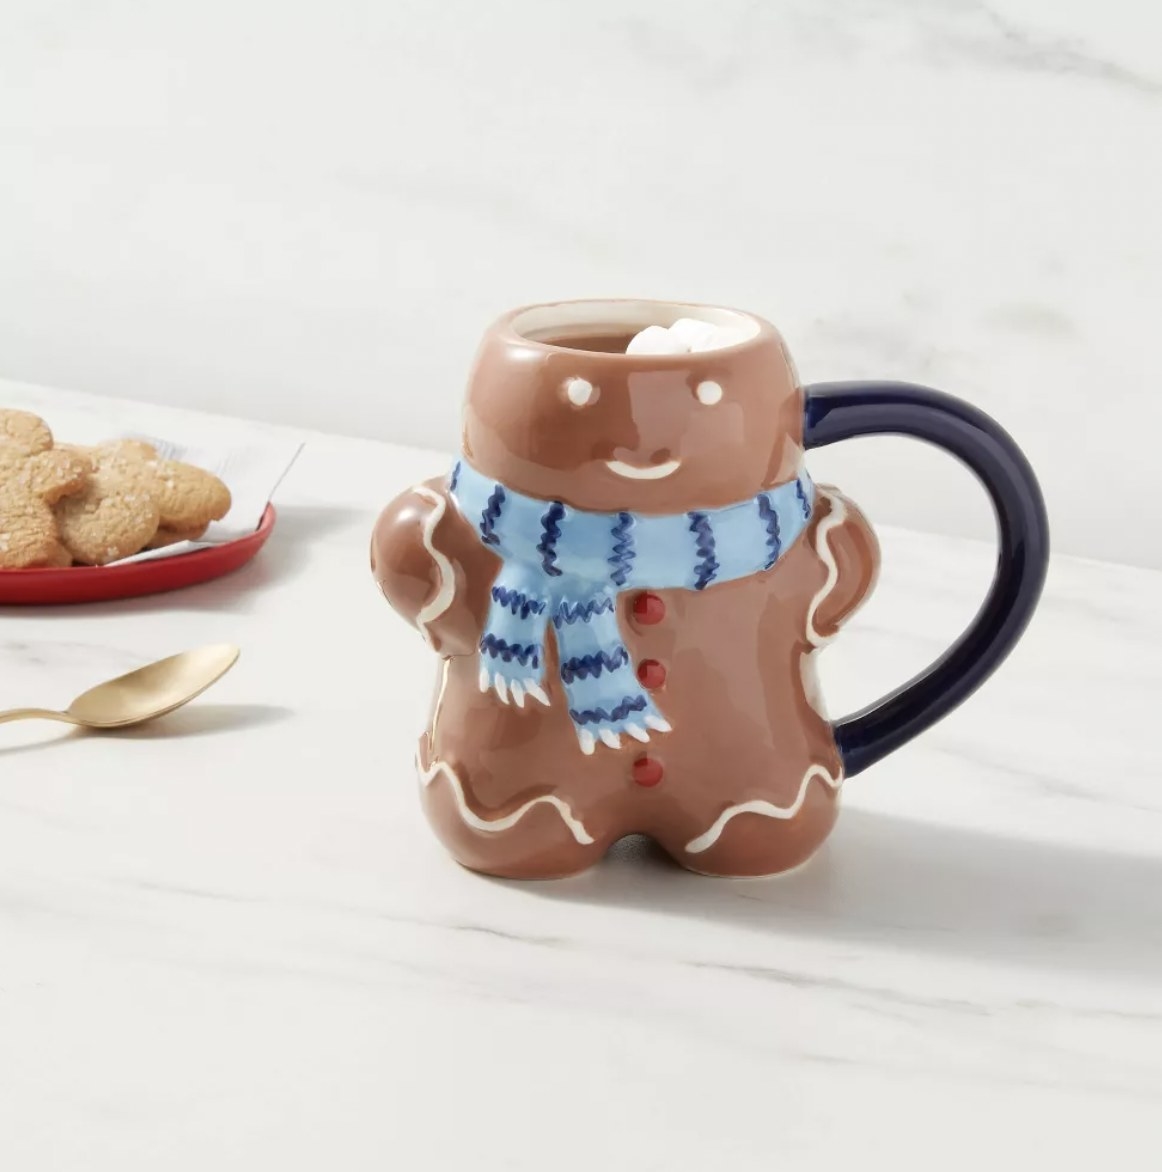 the mug with hot cocoa and marshmallows next to plate of sugar cookies and golden teaspoon